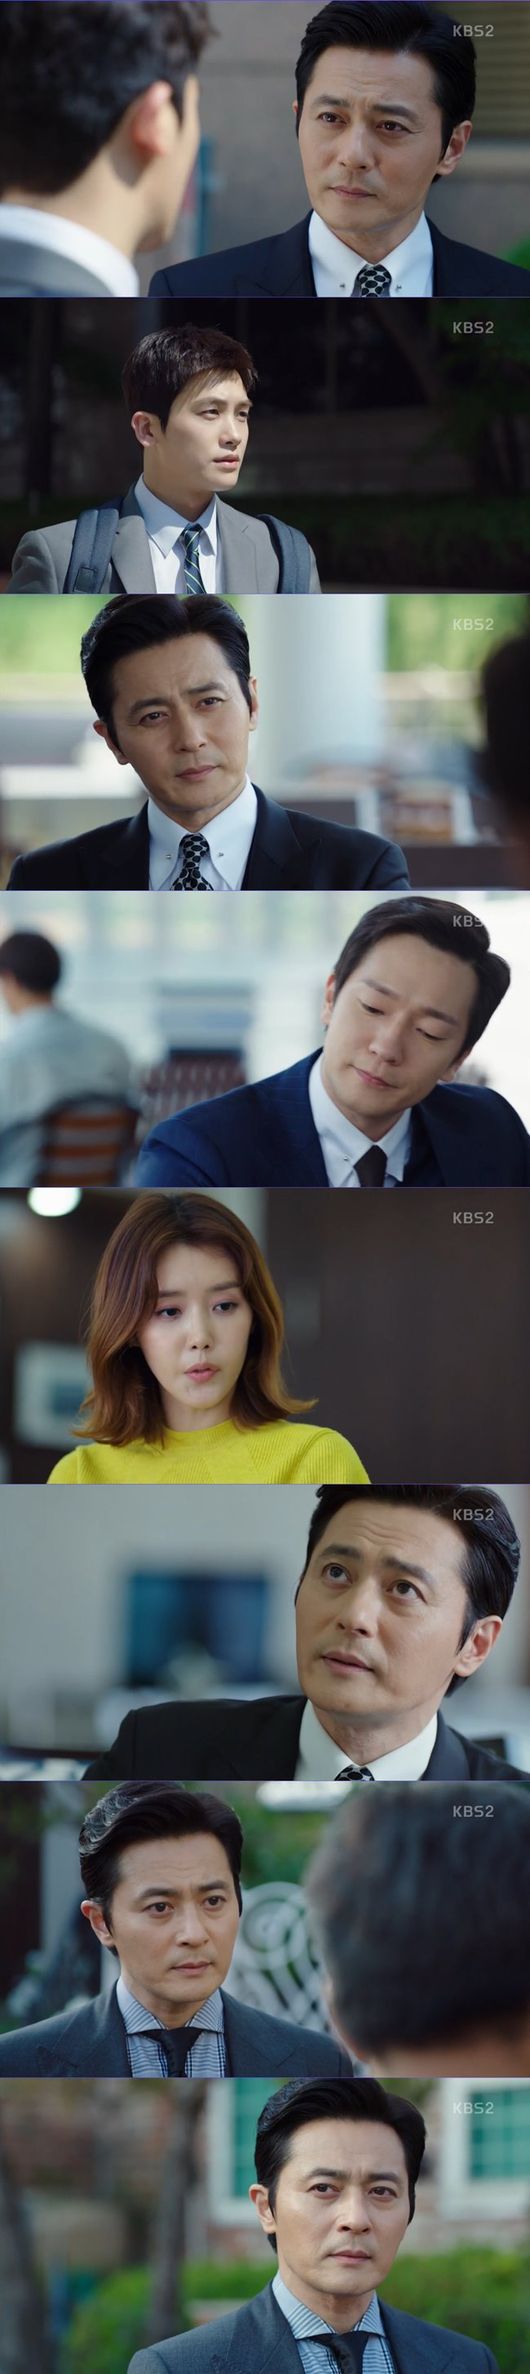 The mistake of Suits Chae Jung-an cost Jang Dong-gun the chance, and Chae Jung-an was eventually fired.Park Hyung-sik and Ko Sung-hee got closer, and started dating.In the 13th KBS 2TV drama Suits (playplayed by Kim Jung-min and directed by Kim Jin-woo) broadcasted on the afternoon of the 6th, Miniforce Seok (Jang Dong-gun) in Danger, Ko Yeon-woo (Park Hyung-sik) and Hong Da-ham (Chae Jung-an) were portrayed to help him.Ham tried to kick out the Miniforce seat, and he fell into Arlington Road.Ko Yeon-u told the Miniforce that they should protect each other.Because Ham (Kim Young-ho) came to see him and asked if he knew the weakness of Miniforce stone.Ko Yeon-u knew that he could be a weakness for the Miniforce seat, so he said they should protect each other.Representative Ham as well as Chae Geun-sik (Choi Kwi-hwa) were also trying to set up a scheme to send out Miniforce seats.Chae Geun-sik worked with Kim Moon-hee (Son Yeo-eun), and Ham was quietly encouraging Chae Geun-sik and Miniforces confrontation.Miniforce and Ko met once again with David Kim (Son Seok-gu) over the Toyota accident lawsuit; Miniforce was put in Danger for the lawsuit.Ham was trying to proceed with the lawsuit to put the Miniforce seat in danger between the Toyota company representative and the company.Miniforce seats were put in a difficult situation because of documents that were not received, and Hong Da-ham (Chae Jung-an) stepped out to find the documents.Ko Yeon-u also wanted to help Miniforce.Although he said it was his job to protect and help Miniforce, Miniforce wanted to stay away from the representative without doing anything.But Ko was not the one to listen to Miniforce. He was trying to find the document with redness.Ko was looking for a problematic report, a person who wrote the Memoir of War, to resolve the lawsuit.Ko found the Memoir of War, found out the address and informed Miniforce.He was proud that he helped Miniforce, and Miniforce was also delighted with the performance of Ko Yeon-woo.The relationship between Ko Yeon-woo and Ji-na Kim (Ko Sung-hee) has become more and more intense.Ji-na Kim pretended to be a friend of Ko Yeon-woo, who did not contact him and broke his promise, but Ko Yeon-woo felt nervous about Ji-na Kim who worried about him.The relationship between the two became more intense, and Ji-na Kim became more and more inclined to go.Ko Yeon-woo introduced Ji-na Kim to Grandmas Boy; Ji-na Kim became a special being to Ko Yeon-woo.Ji-na Kim introduced herself to Grandmas Boy and became more and more concerned about Ko Yeon-woo, who said she was a special person.Ko looked lovingly at Ji-na Kim, who is well suited to Grandmas Boy, and felt pleasant happiness.Ko confessed to Ji-na Kim frankly: I care about Ji-na Kim and I want to know more.Ji-na Kim expressed his favorite heart by kissing the figure of such a good actor first.The relationship between Ko Yeon-u and Ji-na Kim was getting stronger and stronger.Miniforce was in Danger despite Kos help: finding Memoir of War, which he thought had never seen before.The writer of Memoir of War, which Ko Yeon-woo found, denied that he was not a Memoir of War.It was his explanation that the content of Memoir of War, although not Memoir of War he wrote, was true.It was David Kims Arlington Road, which eventually prevented Miniforce from perjury, and tried to incriminate him.Miniforce Seok wanted the CEO of the Toyota company to recognize the defects directly and to reach an agreement with the bereaved family.He persuaded Seo to do so, and tried to withdraw the lawsuits filed against him and the company.Miniforce still thought that Memoir of War did not exist, but Hong Da-ham confirmed the existence of Memoir of War and reproached himself.Ko Yeon-woo found such a redness strange, and he could see that it found Memoir of War.Ko wanted to tell Miniforce that Hongdaham had found Memoir of War, but Hongdaham wanted to pretend not to know Memoir of War to protect Miniforce seats even though he knew his mistake.It was revealed that Hong Da-ham knew Ko Yeon-woos secret. Chae Geun-sik was listening to Miniforces room. He had caught Miniforces weakness.In the end, Ham found out that the company was sued.As soon as Hong Da-ham tried to reveal the fact about Memoir of War to Miniforce Seok, he and Kang Ha-yeon (Jin Hee-kyung) came to Miniforce Seok and the opportunity was lost.Ham suggested that we overcome Danger together, but Miniforce still did not believe him.The redness that witnessed Danger was again troubled.Ko Yeon-woo also learned that Hong Da-ham didnt tell Miniforce the truth.Ham reached an agreement, and Miniforce tried to sign a statement that he had never seen Memoir of War.Ko Yeon-woo stopped the moment and told the truth about Hong Da-sung.Hongdaham pressed the Hongdaham, why he had found Memoir of War but had hidden the facts, explaining that it was to protect him from Miniforce.Hong Da-ham admitted to the mistake and reproached himself, but Miniforce explained that the discovery of the fake Memoir of War itself was evidence that he was trying to frame him.But the redness was already the situation that had eliminated Memoir of War, thinking about the situation where Miniforce seats would be difficult.Hong Da-ham was fired. Miniforce told Kang Ha-yeon the truth and said he would fire Hong Da-ham himself.However, Kang Ha-yeon knew the relationship between Miniforce and Hongdaham, so he informed him of his dismissal.I was grateful to the Hong Da-ham for doing my job well, and I was more sorry because I believed in each other.KBS 2TV Broadcast Screen Capture